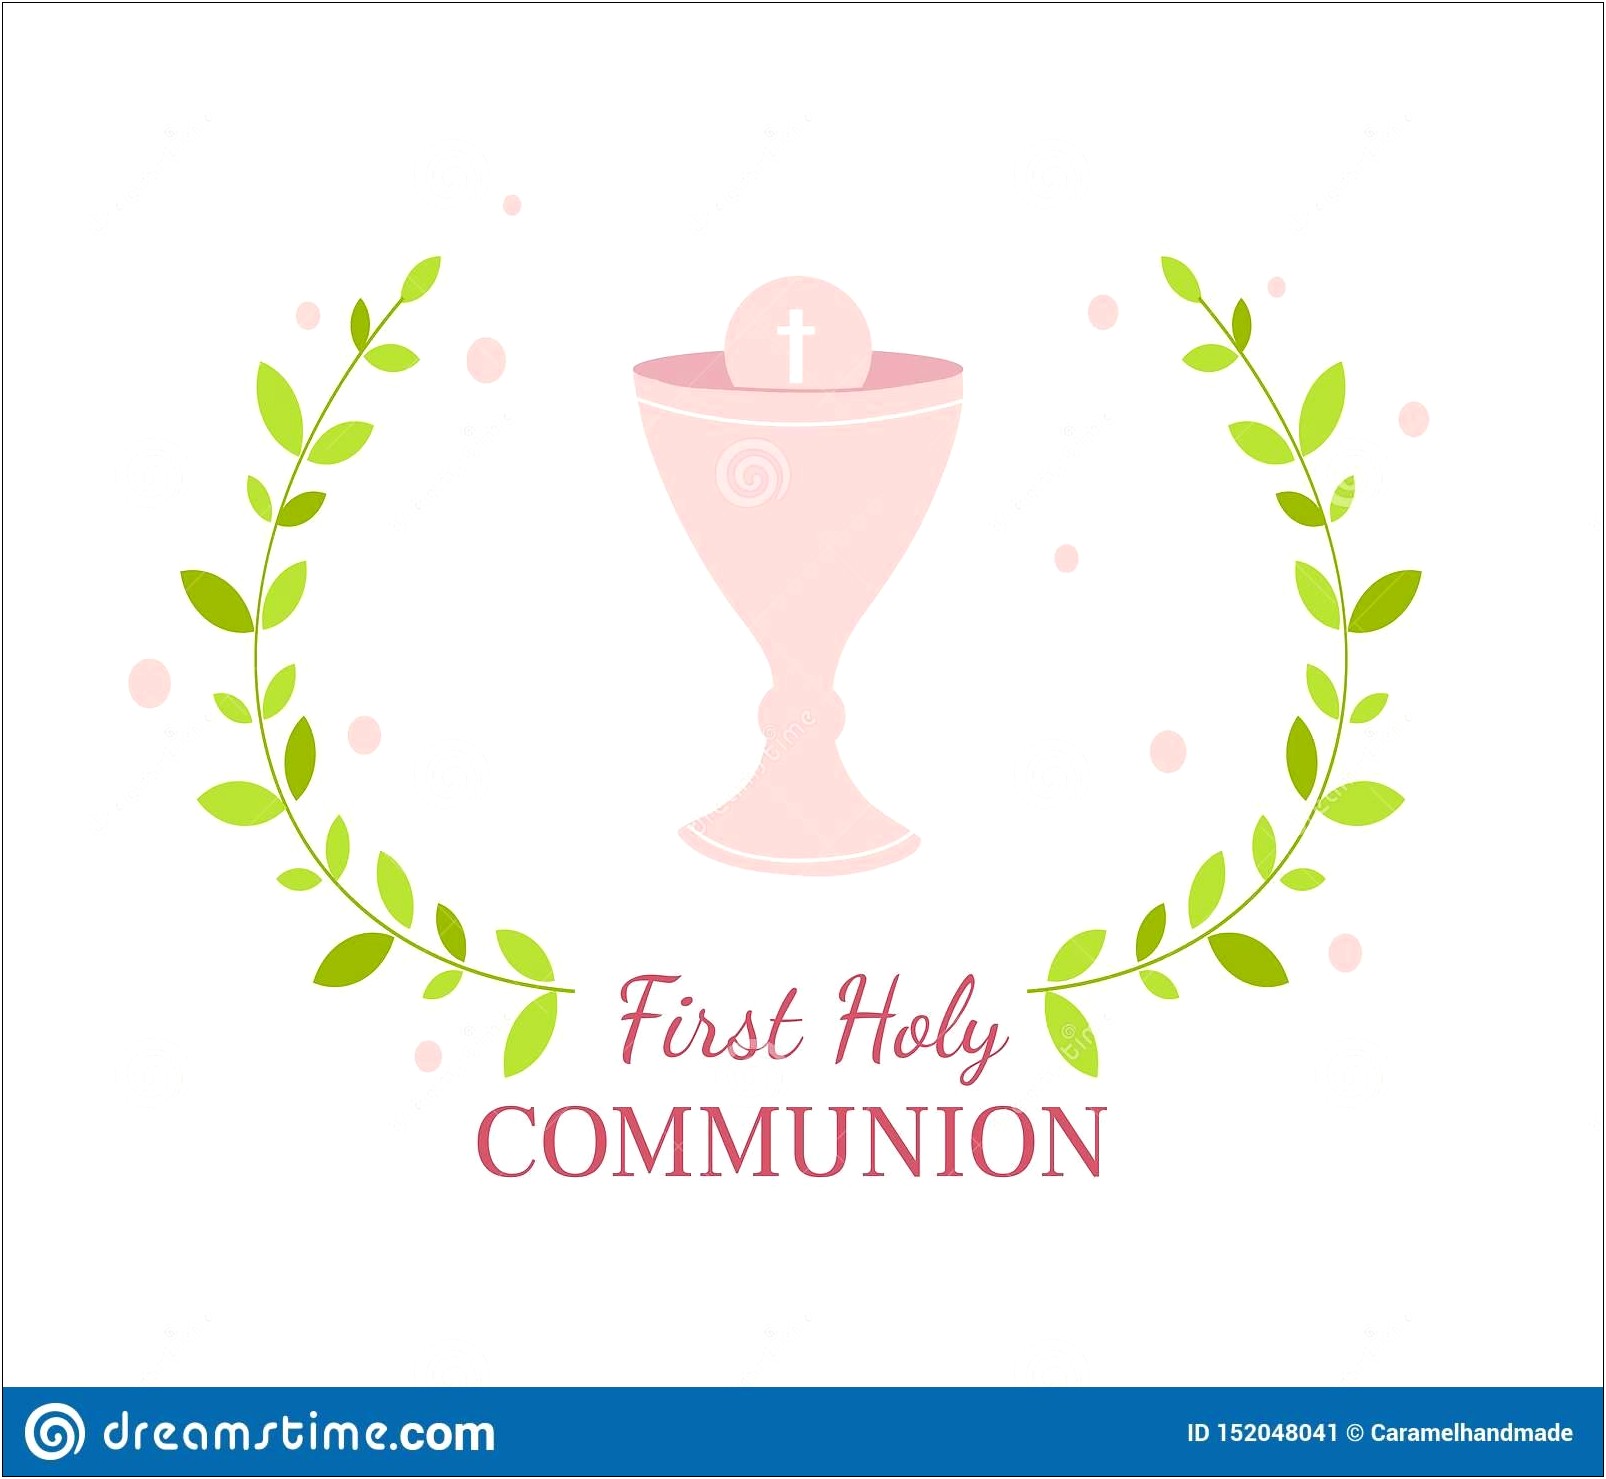 First Holy Communion Invitation Templates Free